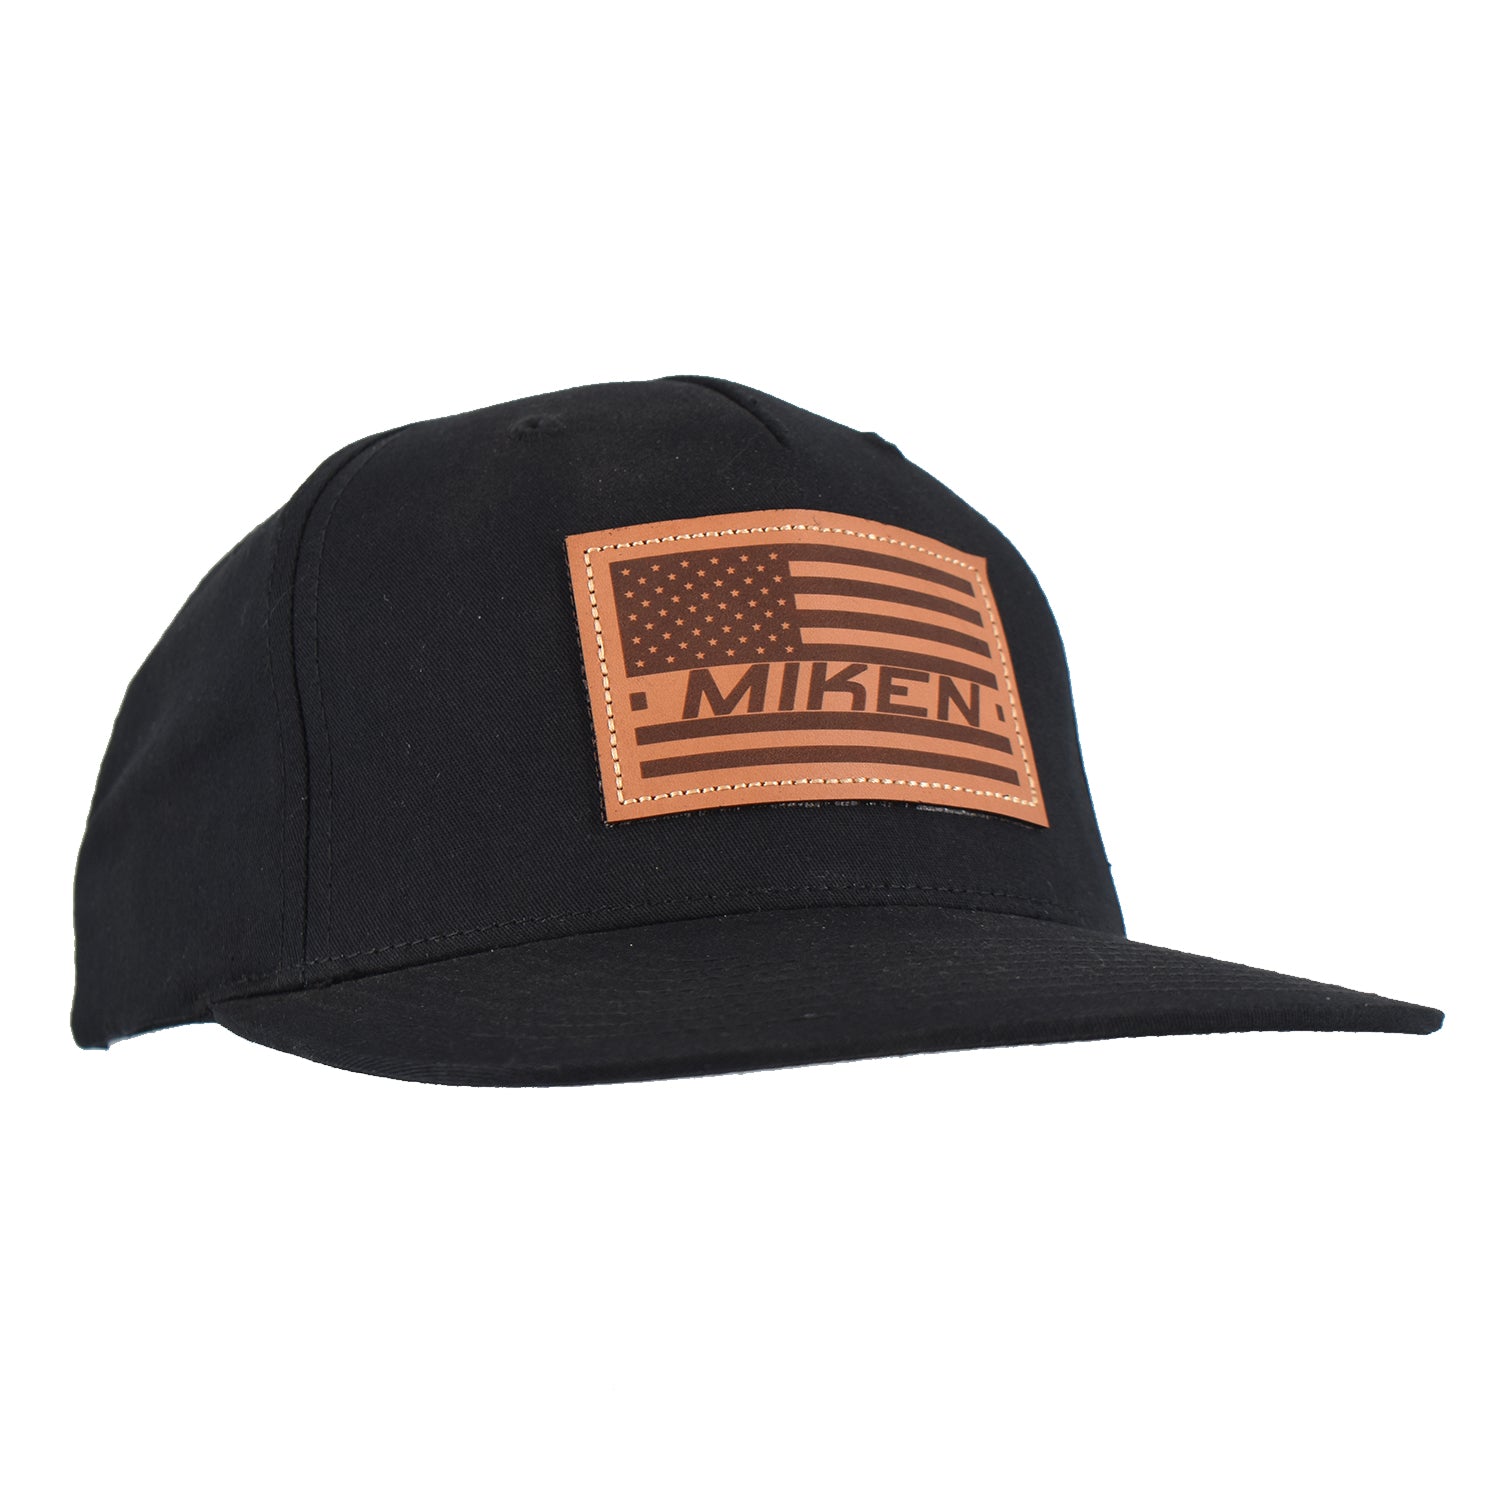 Miken Streetwear Snapback Hat- 255 All Black/Miken USA Leather Patch